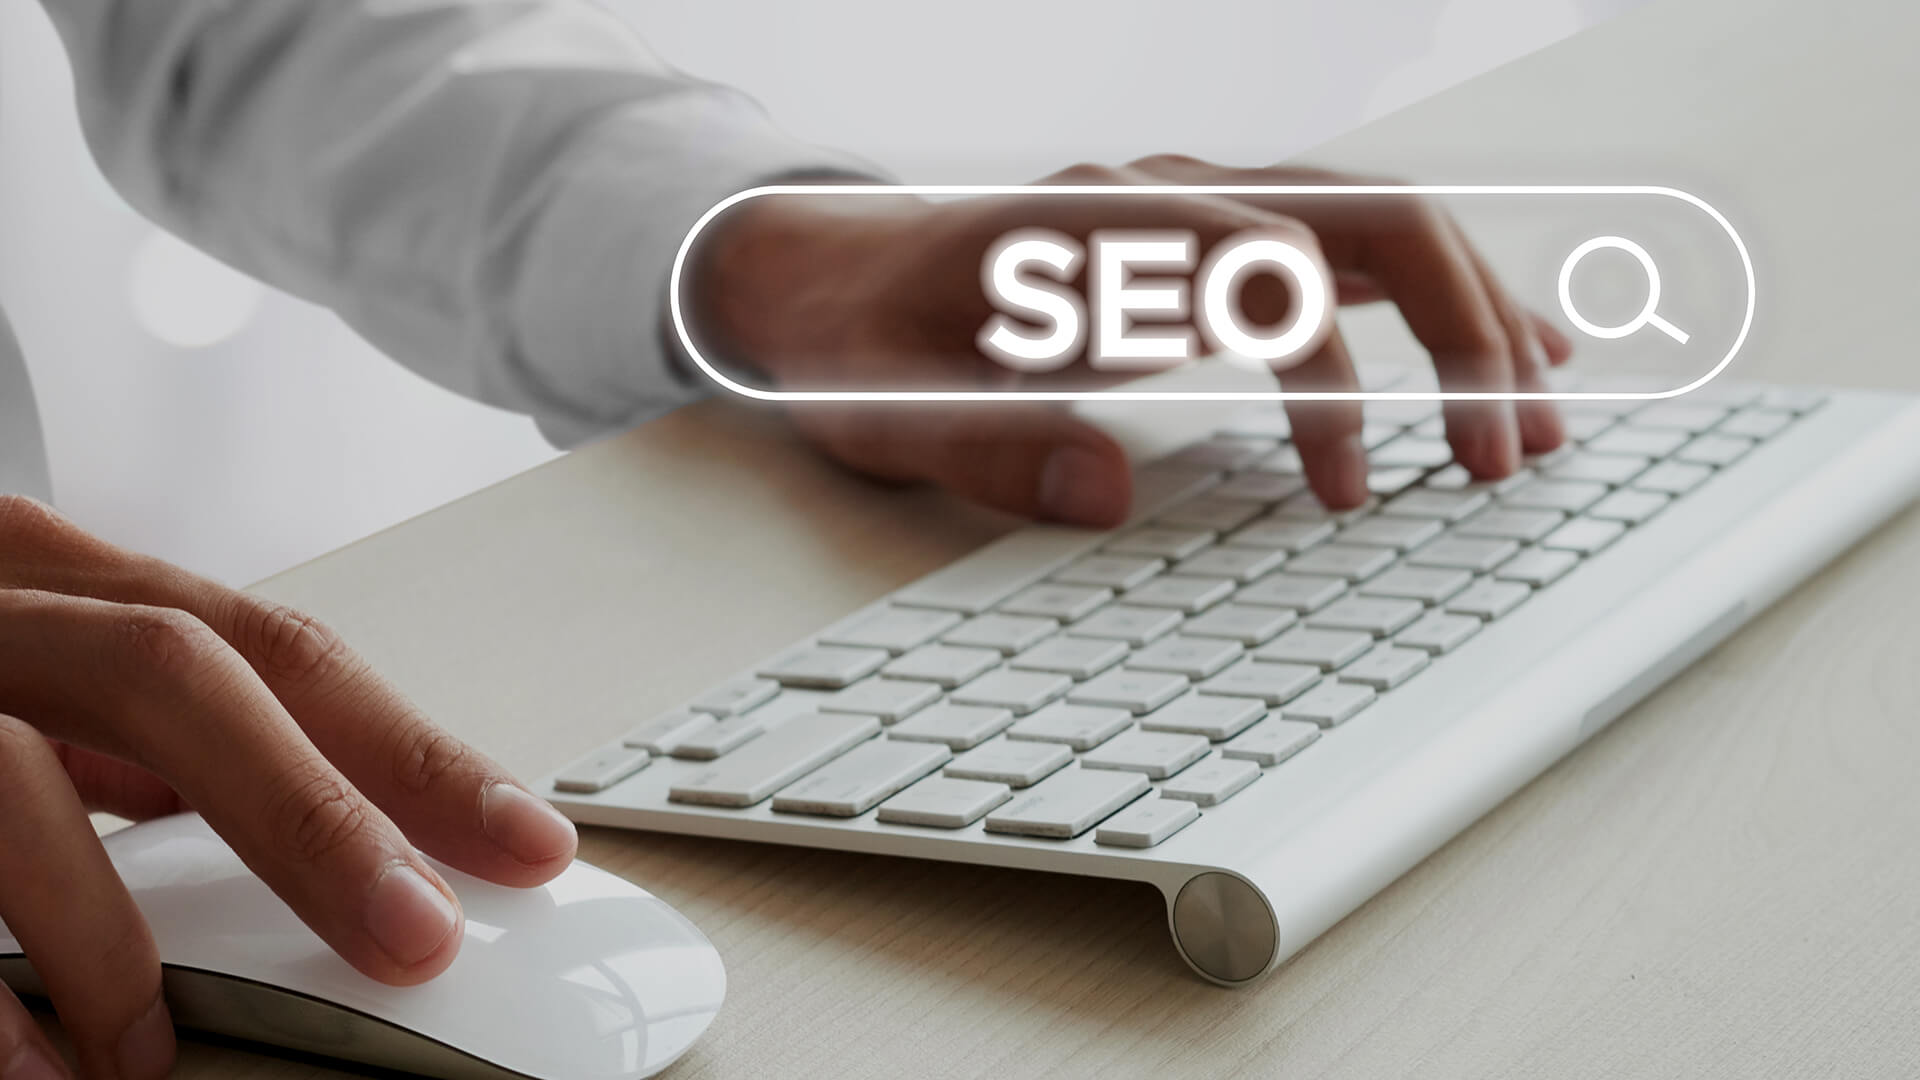 The importance of SEO for businesses and how a digital marketing agency in Dubai can help